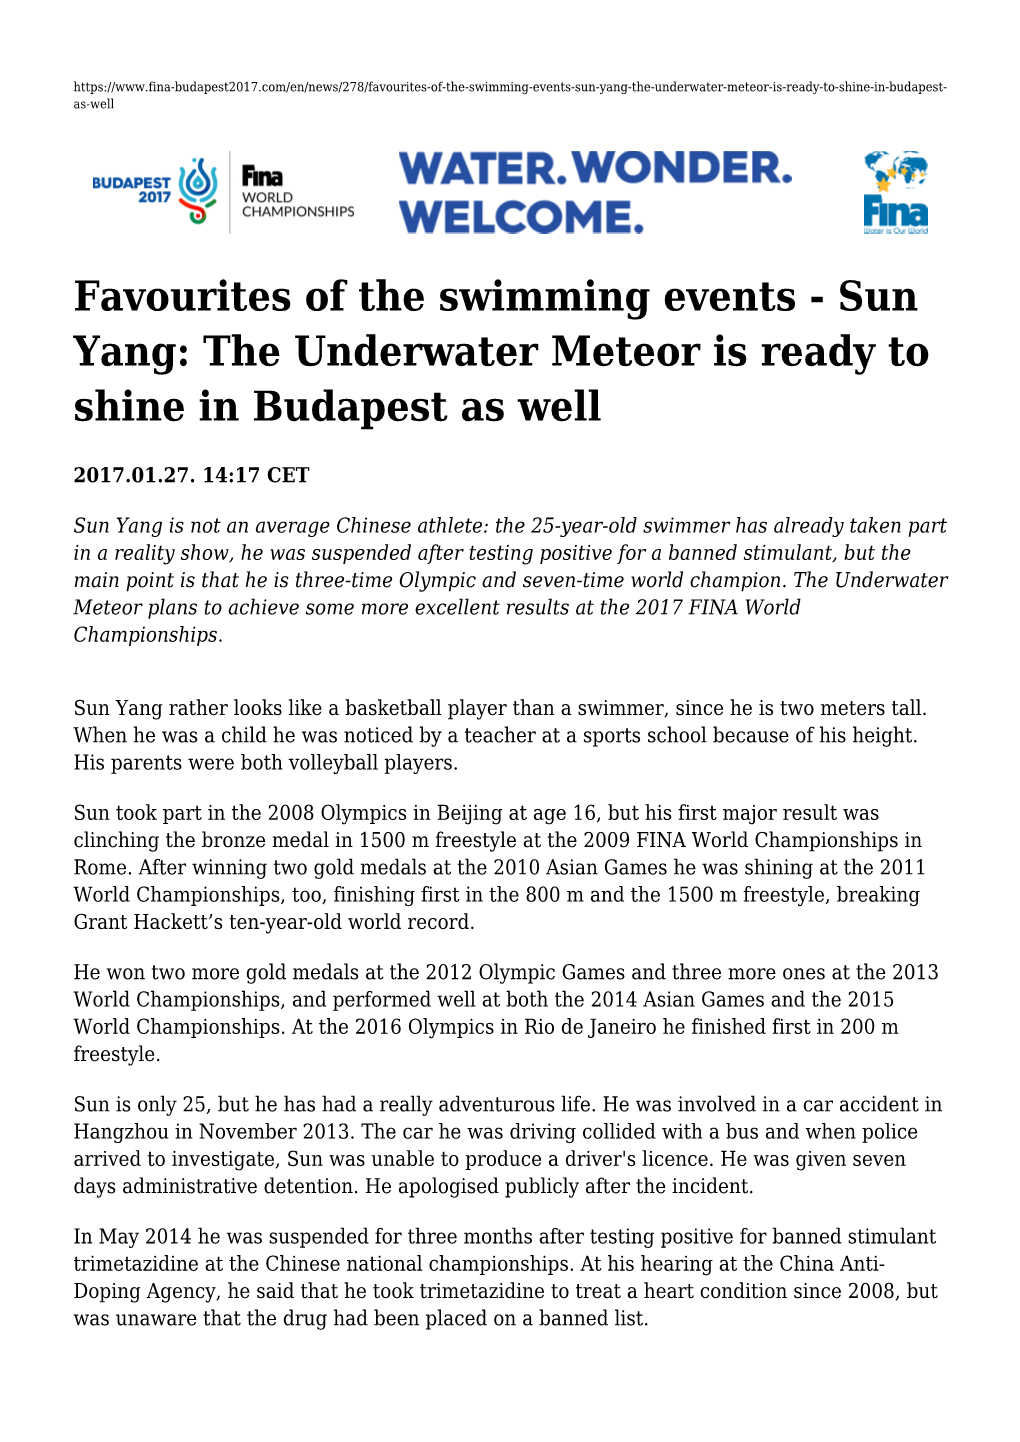 Sun Yang: the Underwater Meteor Is Ready to Shine in Budapest As Well